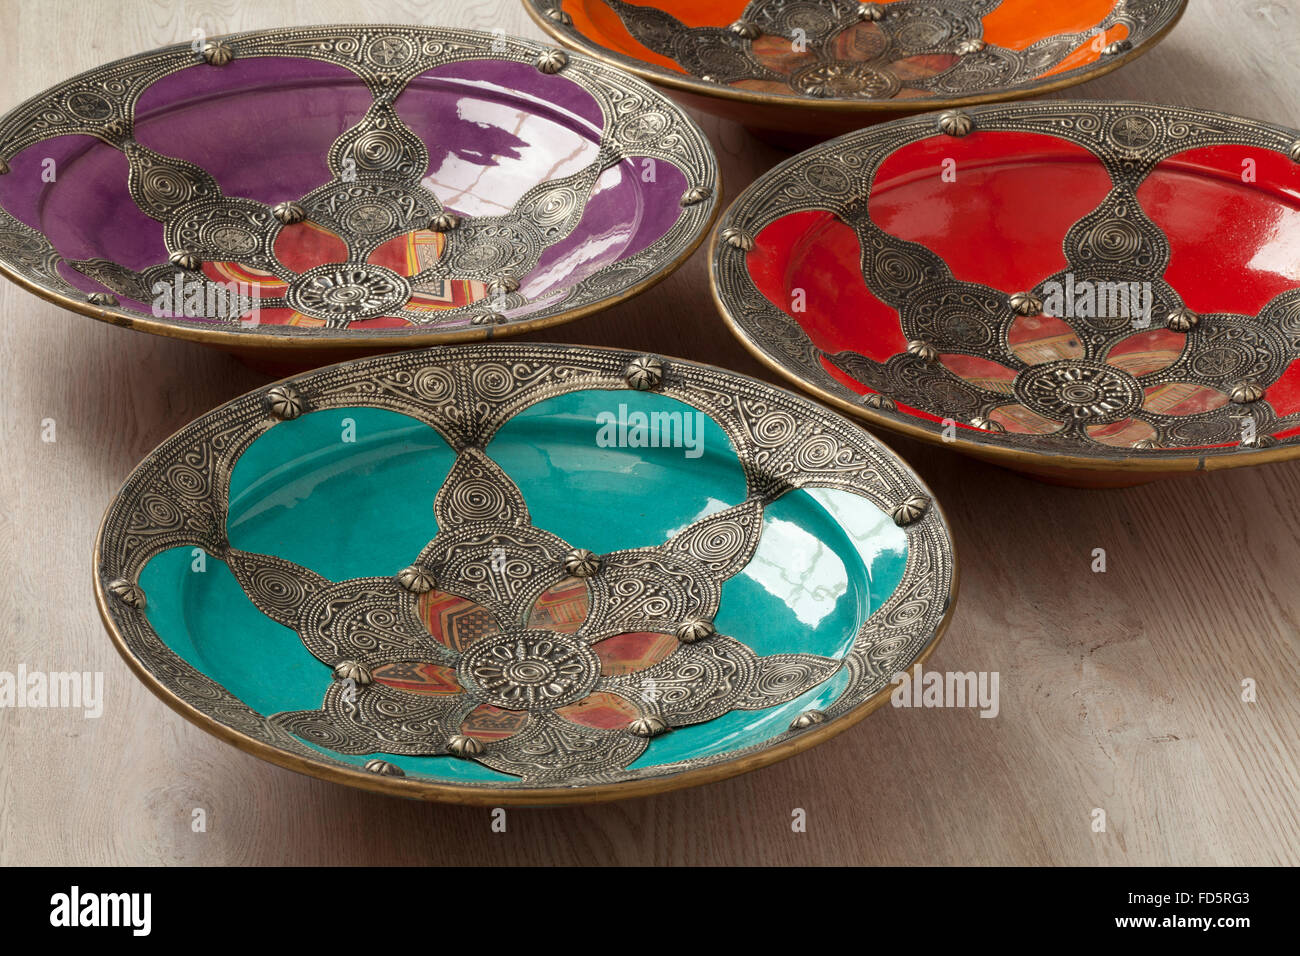 Colorful traditional Moroccan decorated bowls Stock Photo